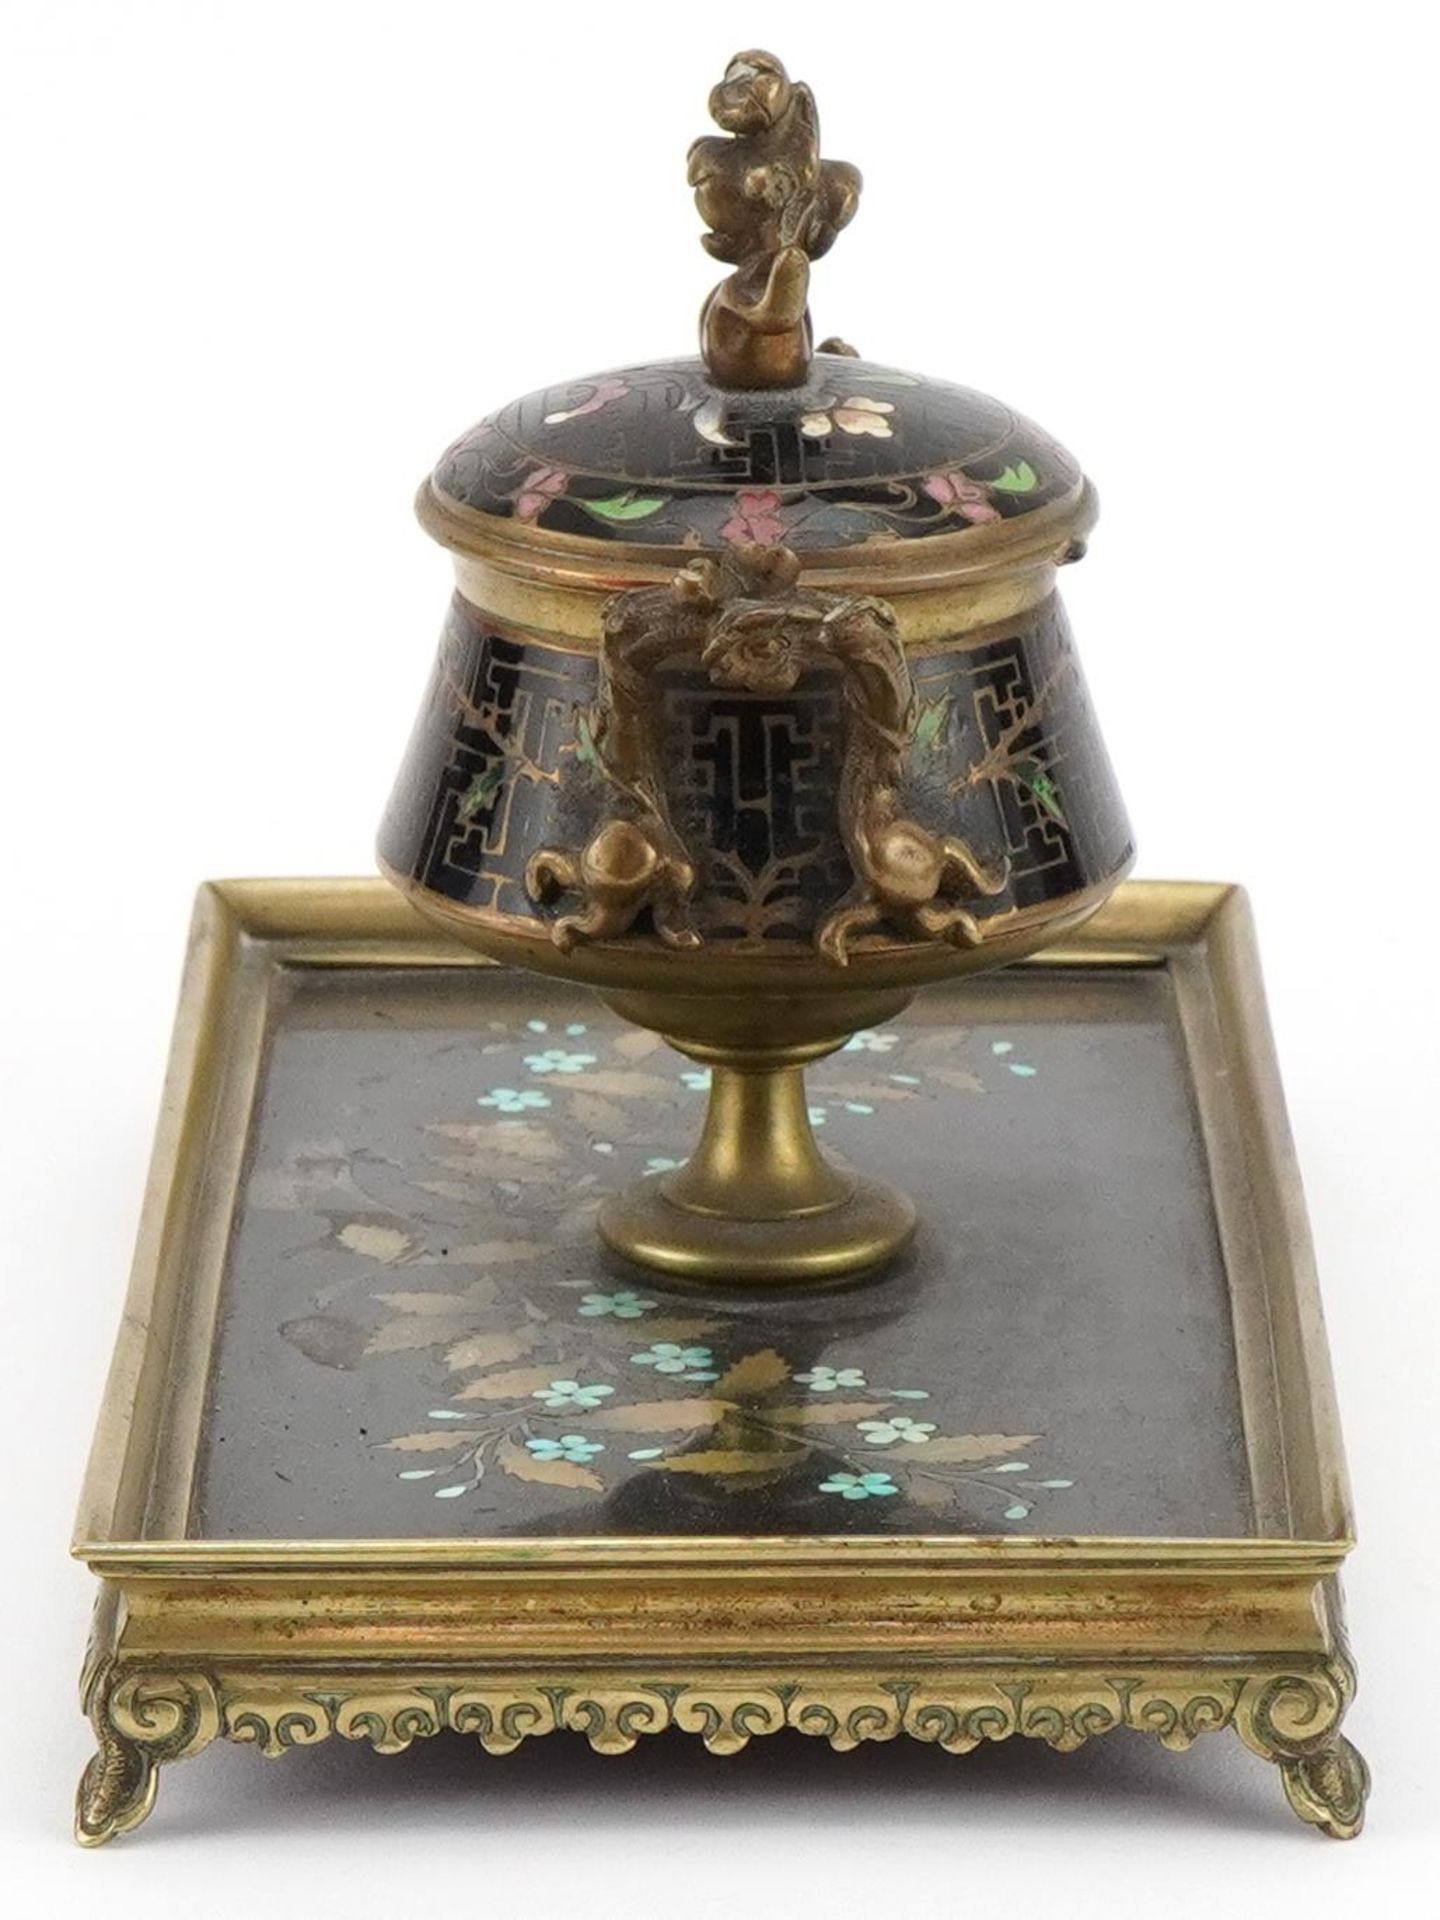 19th century ornate brass pietra dura and cloisonne desk inkwell with glass liner finely inlaid - Image 4 of 8